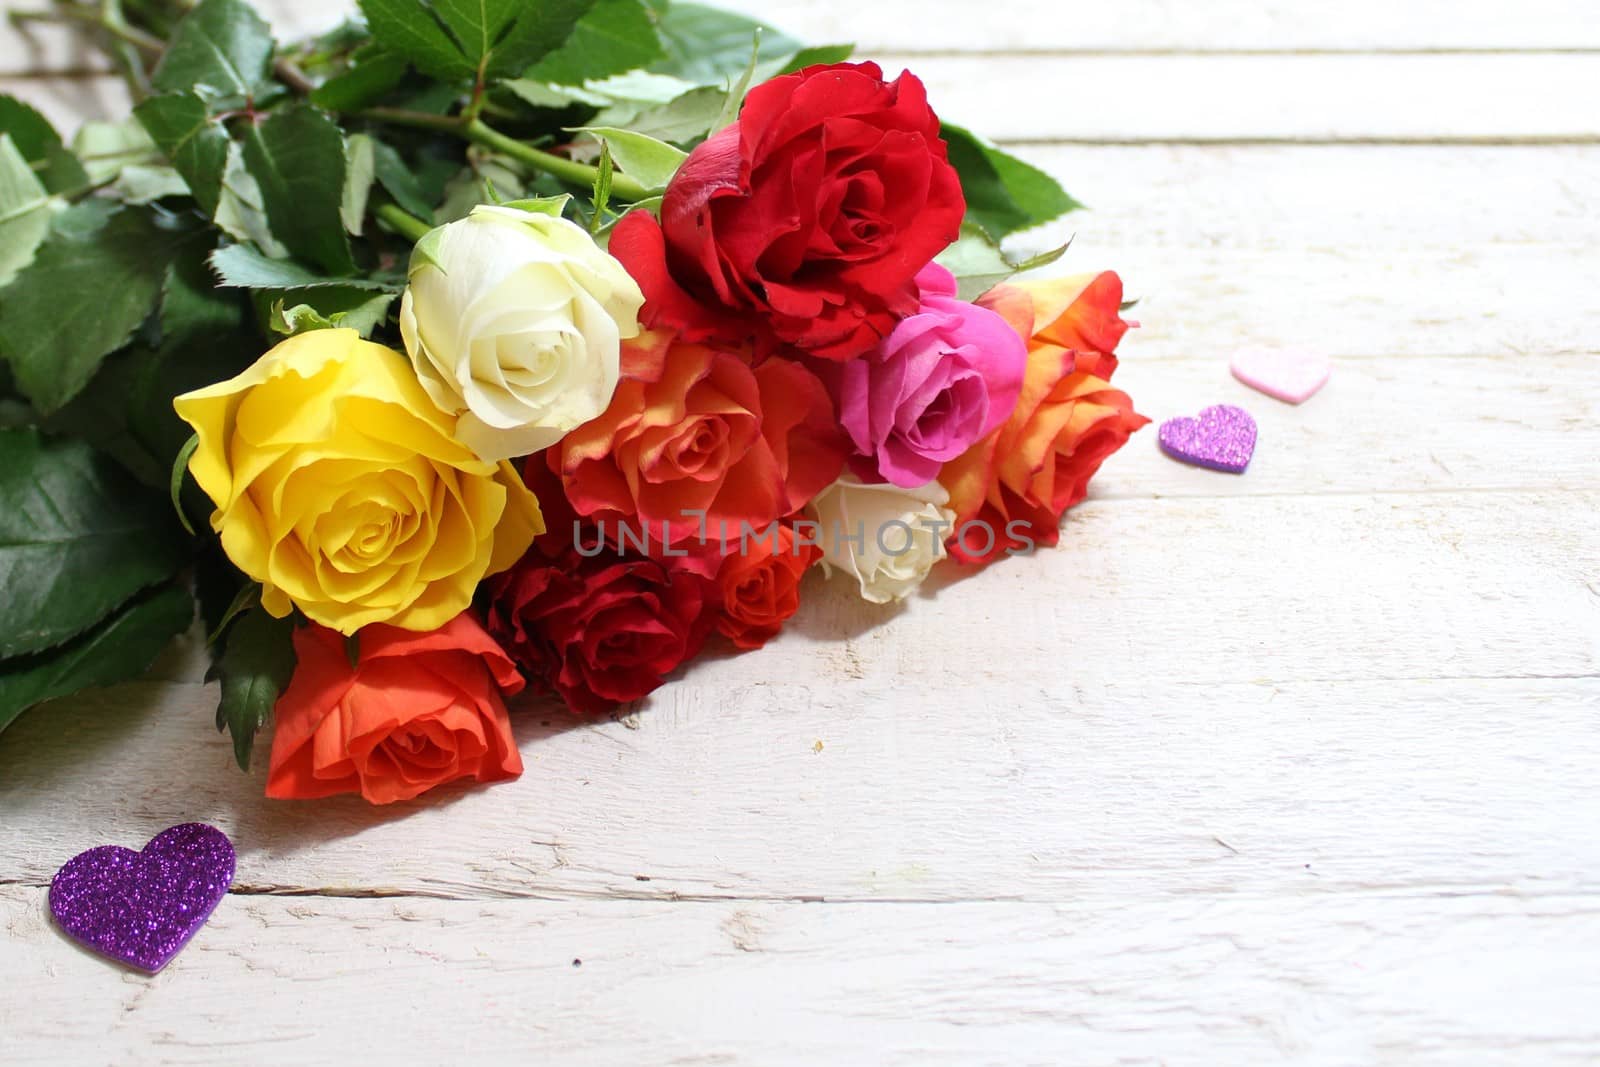 The picture shows colorful roses with hearts.